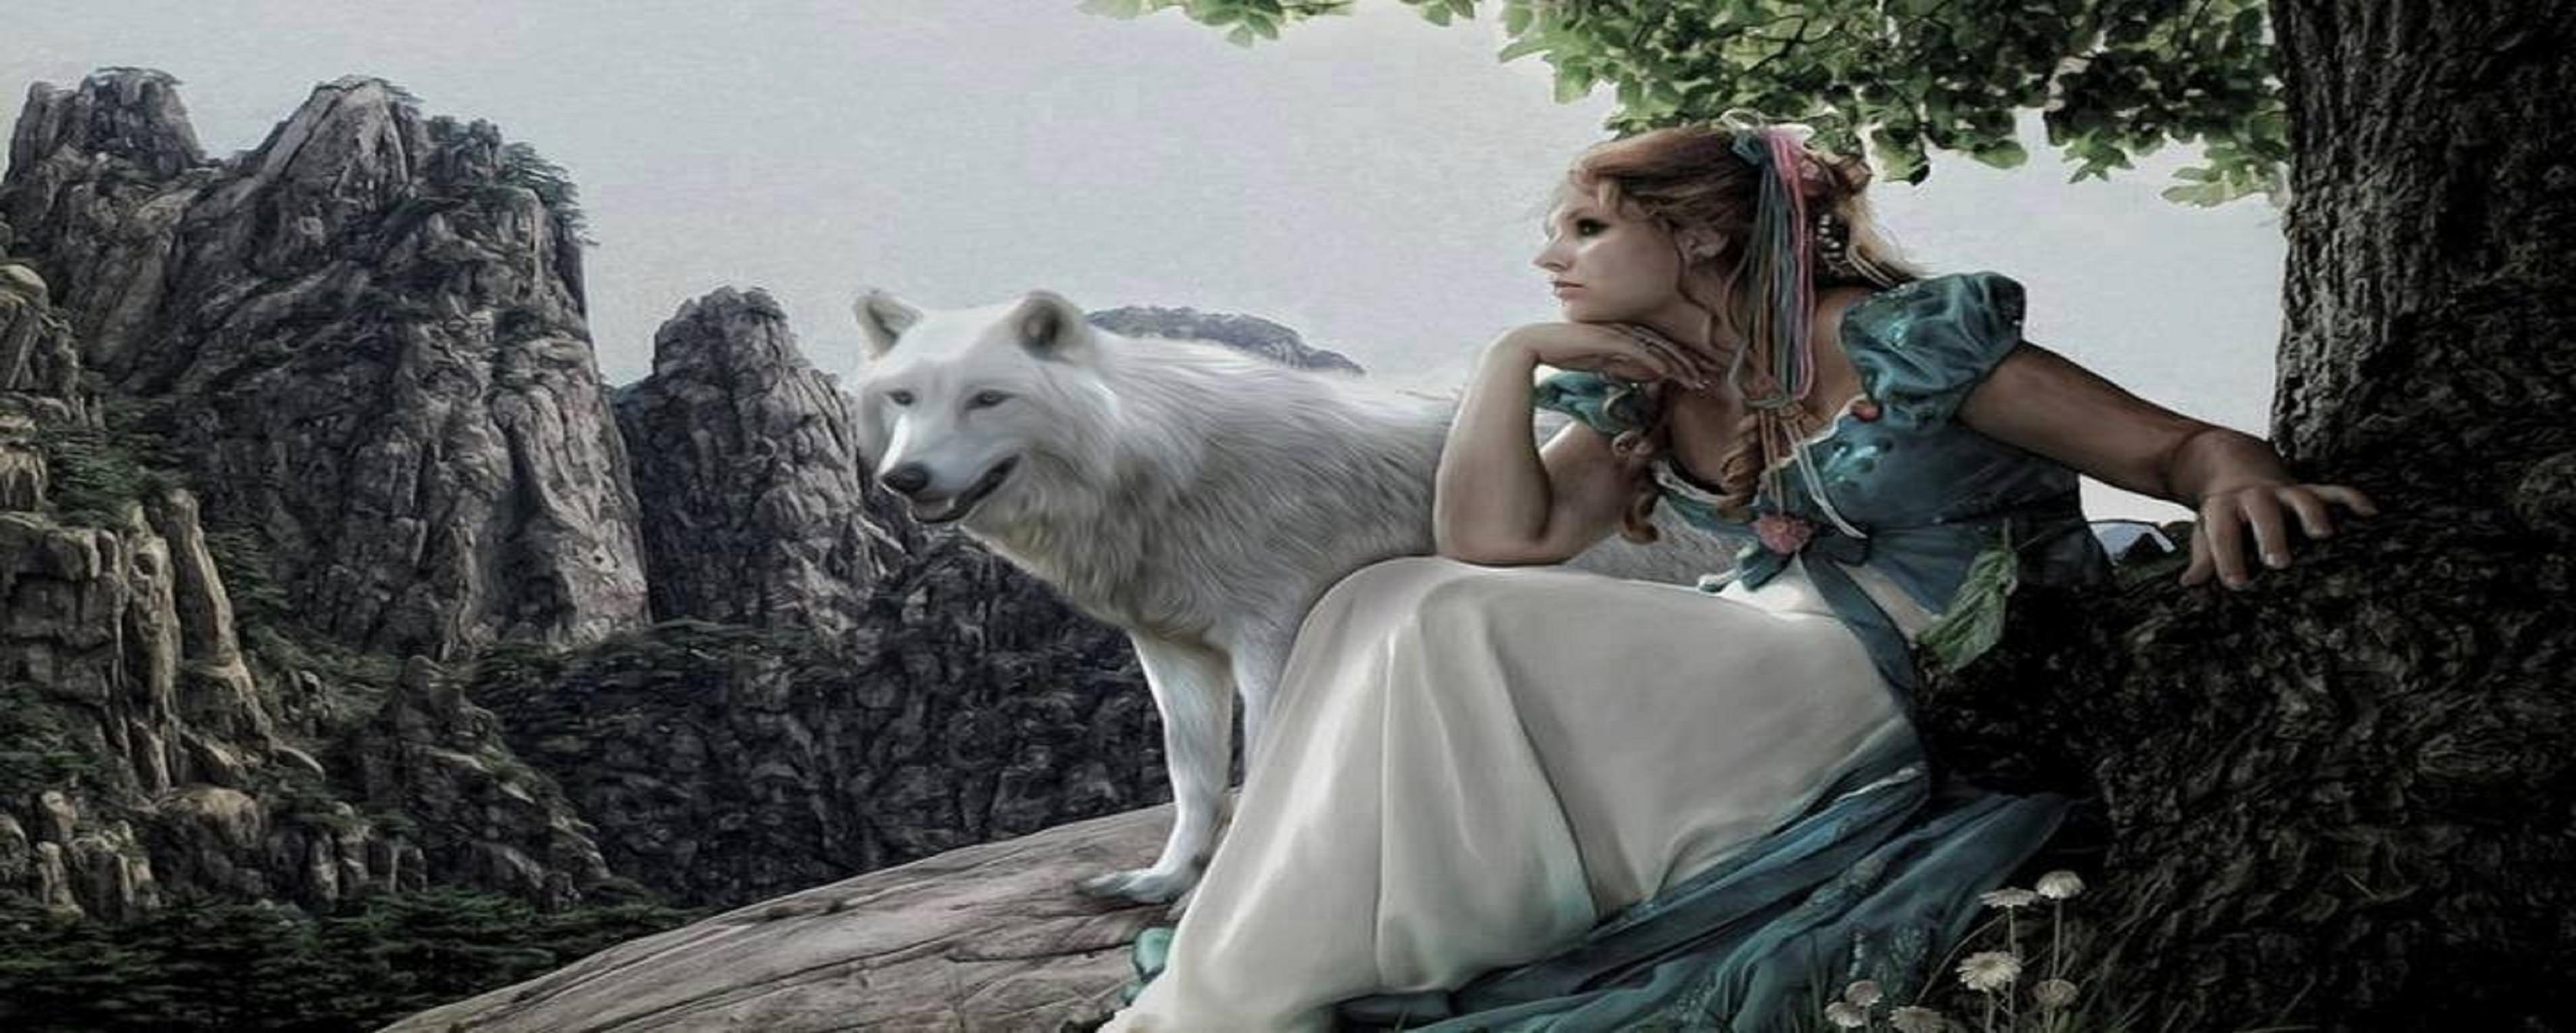 Wolf And Girl Wallpaper